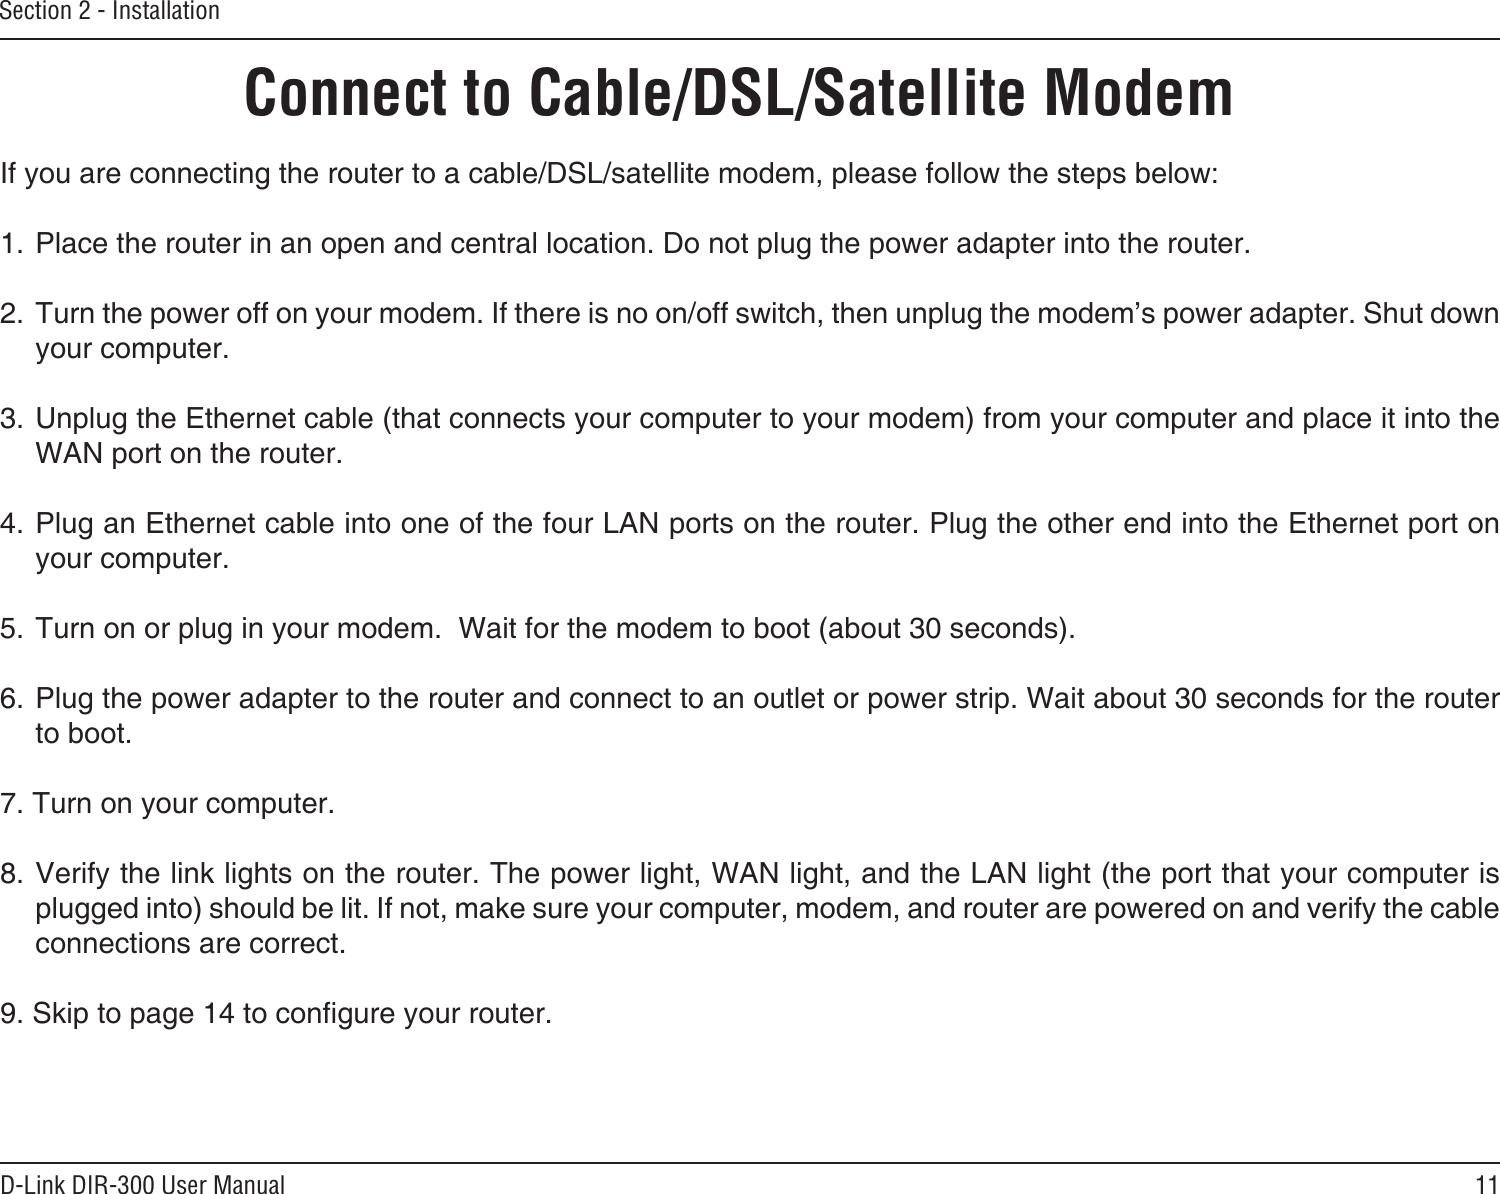 11D-Link DIR-300 User ManualSection 2 - InstallationIf you are connecting the router to a cable/DSL/satellite modem, please follow the steps below:1. Place the router in an open and central location. Do not plug the power adapter into the router. 2. Turn the power off on your modem. If there is no on/off switch, then unplug the modem’s power adapter. Shut down your computer.3. Unplug the Ethernet cable (that connects your computer to your modem) from your computer and place it into the WAN port on the router.  4. Plug an Ethernet cable into one of the four LAN ports on the router. Plug the other end into the Ethernet port on your computer.5. Turn on or plug in your modem.  Wait for the modem to boot (about 30 seconds). 6. Plug the power adapter to the router and connect to an outlet or power strip. Wait about 30 seconds for the router to boot. 7. Turn on your computer. 8. Verify the link lights on the router. The power light, WAN light, and the LAN light (the port that your computer is plugged into) should be lit. If not, make sure your computer, modem, and router are powered on and verify the cable connections are correct. 9. Skip to page 14 to congure your router. Connect to Cable/DSL/Satellite Modem